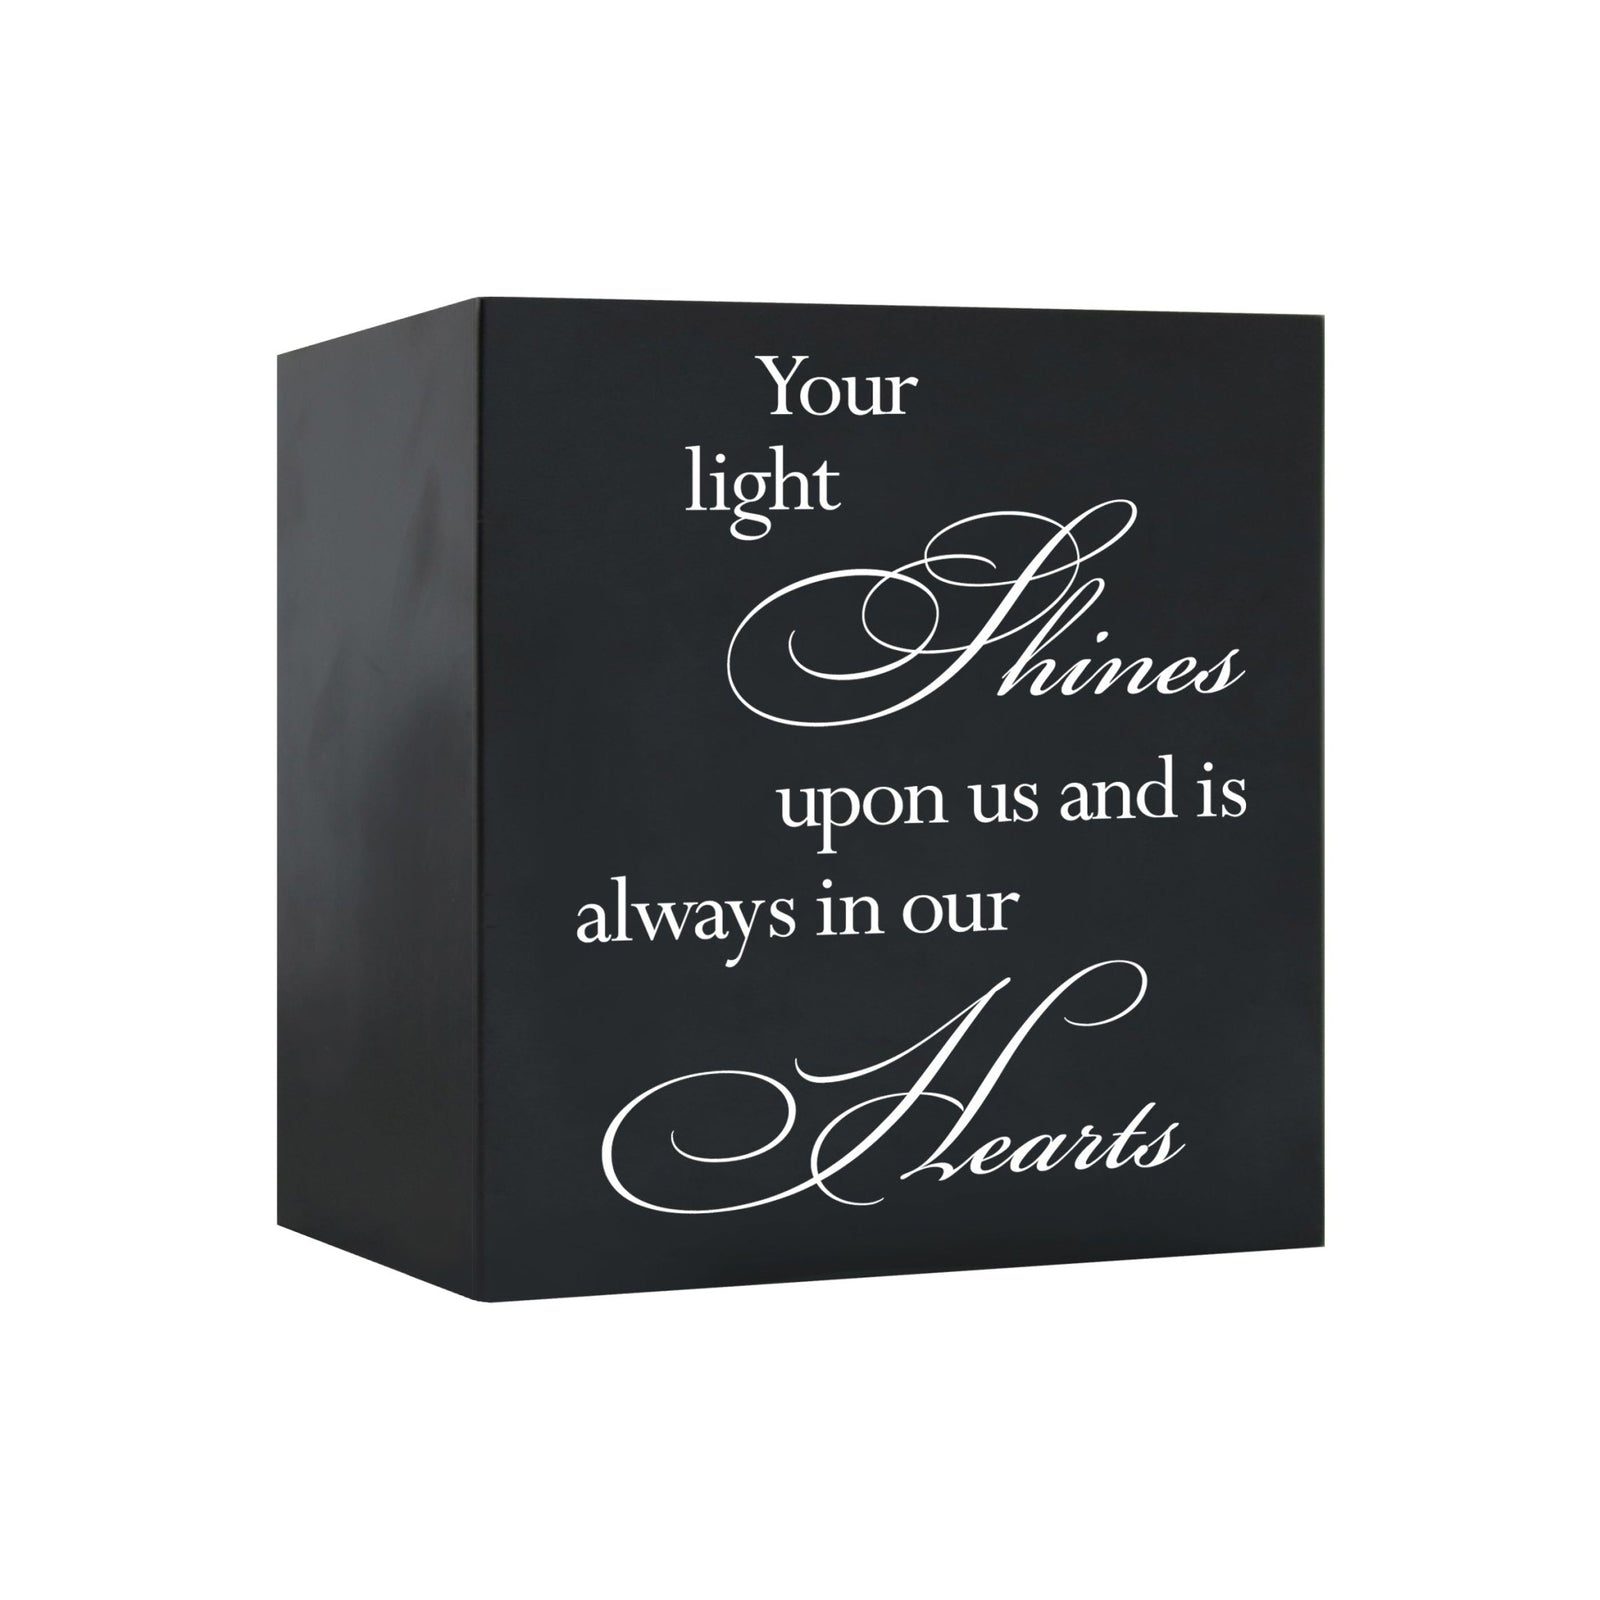 Memorial Bereavement Keepsake Cremation Shadow Box and Urn 6x6in Holds 53 Cu Inches Of Human Ashes Your Light Shines - LifeSong Milestones